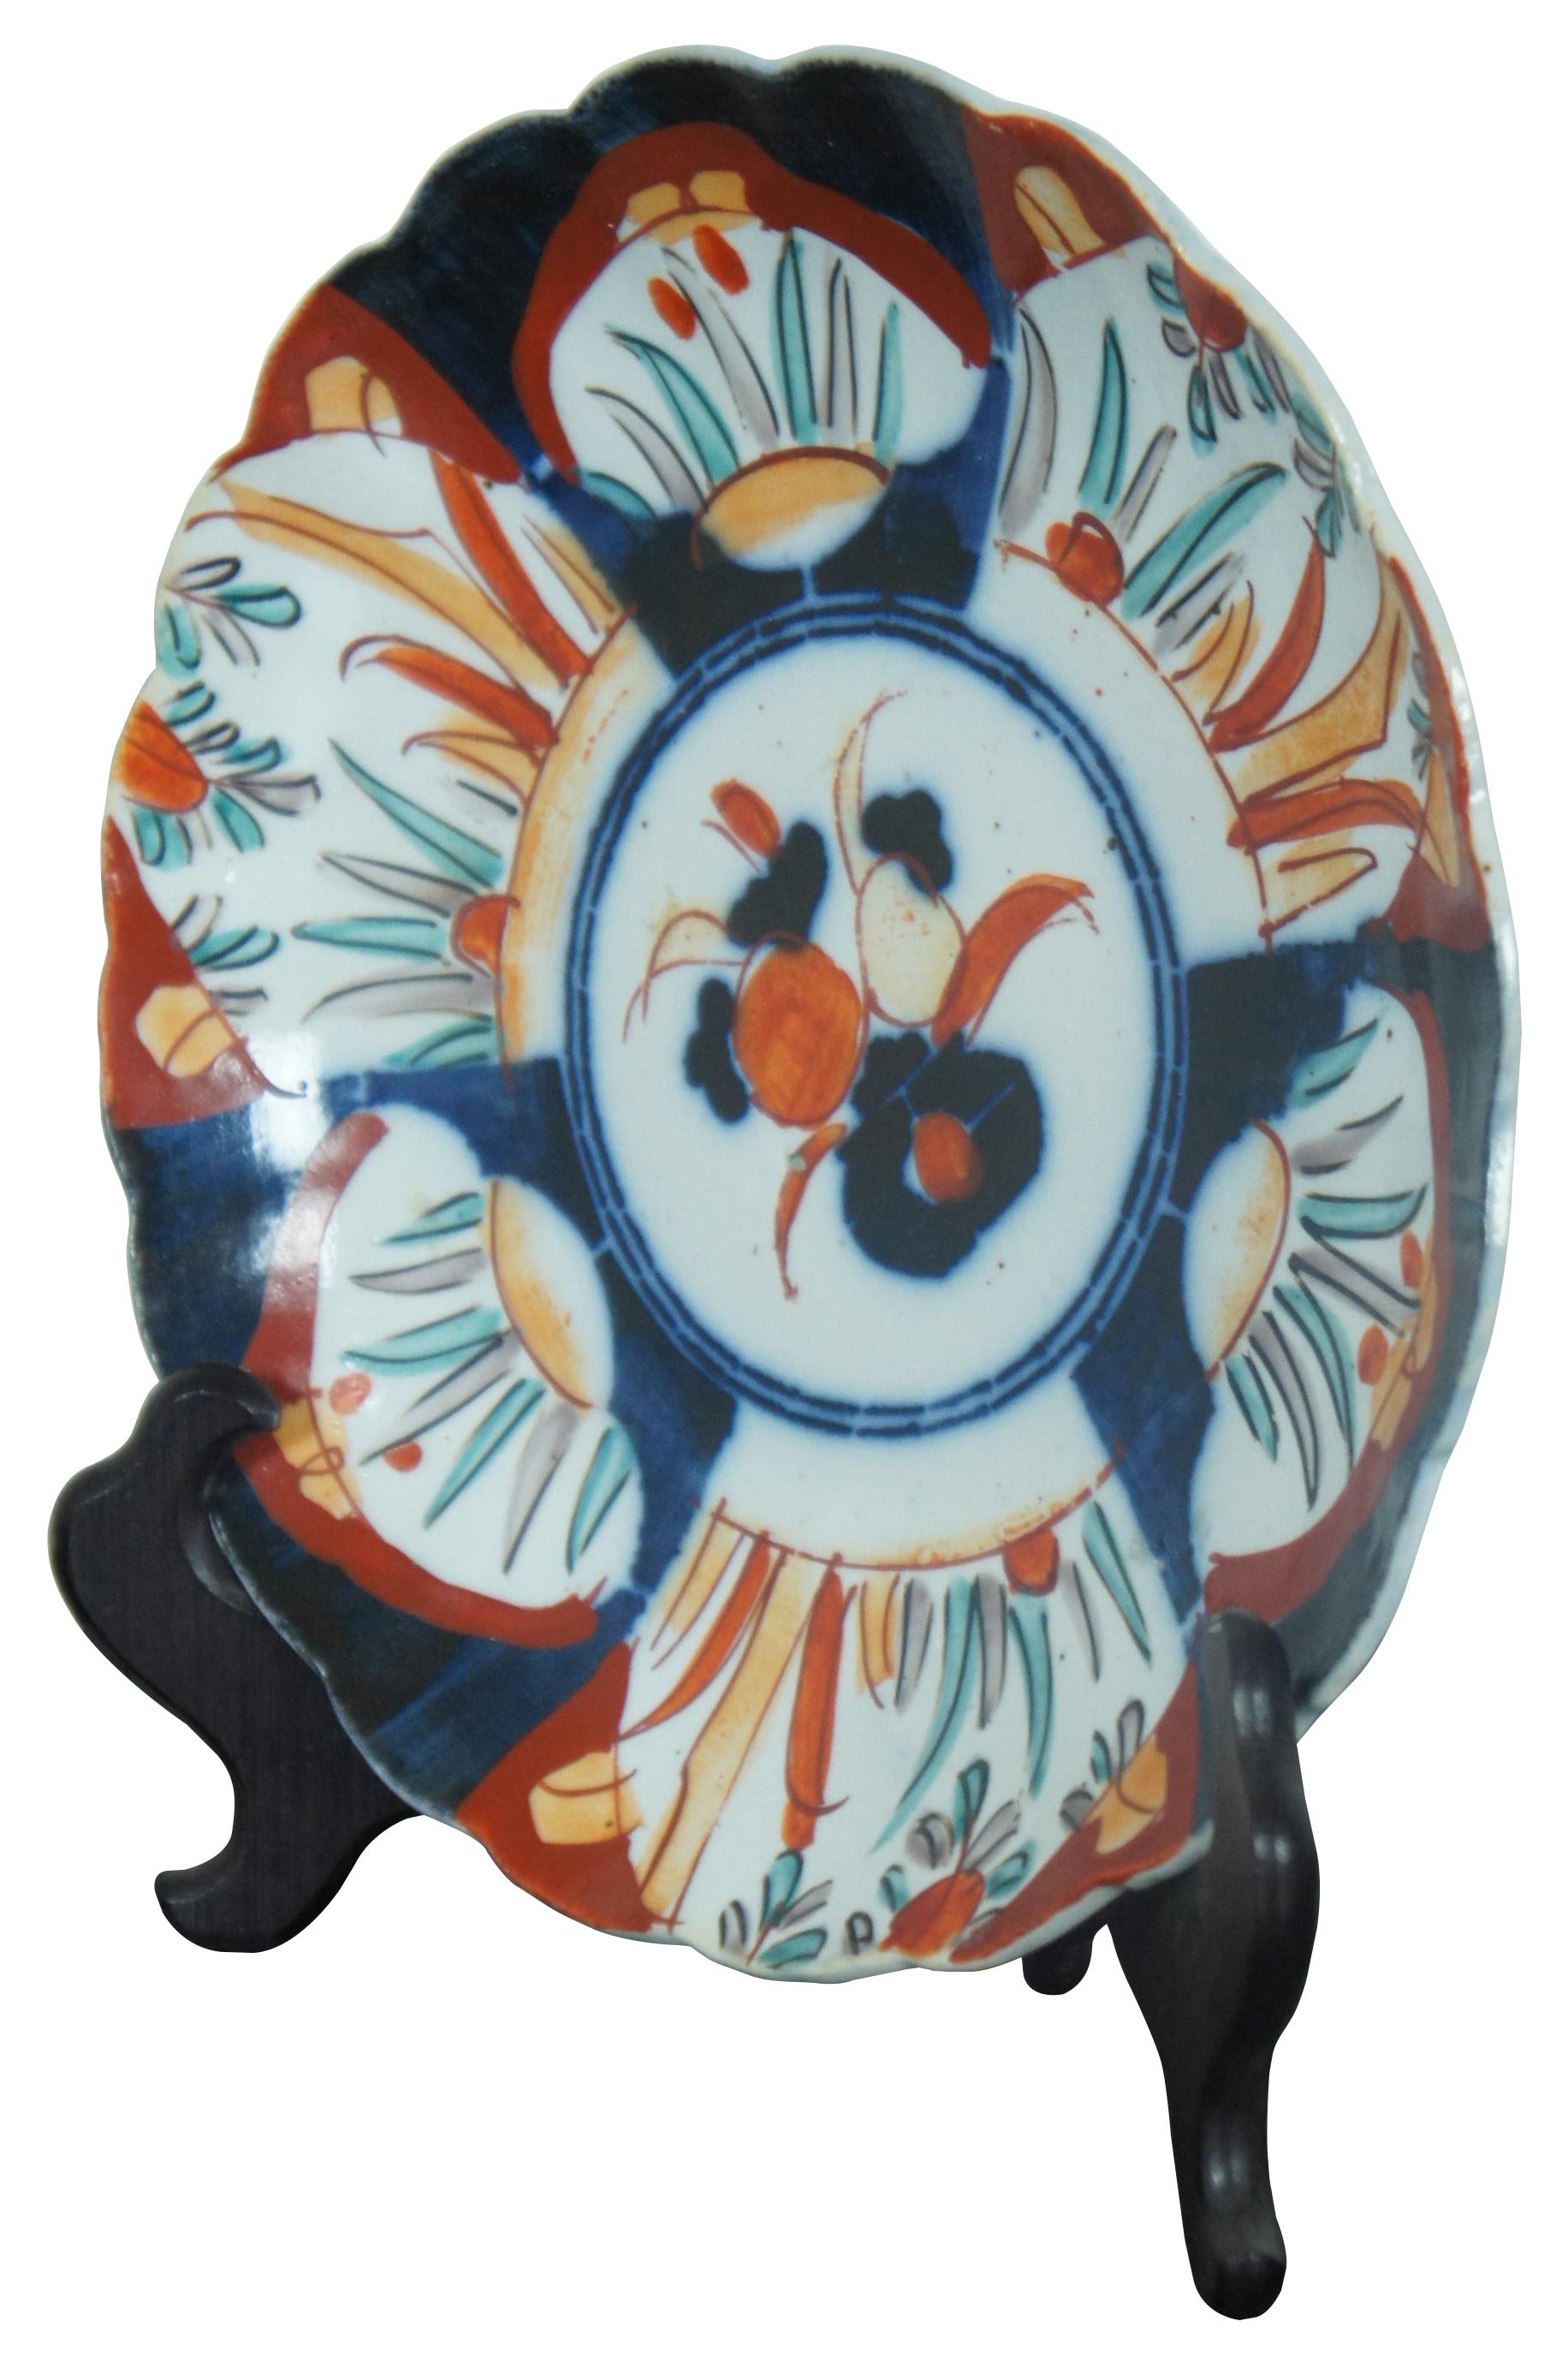 Antique Meiji period Japanese imari porcelain plate with scalloped edges and an orange and blue design of plants and flowers. Display on a folding wood stand.
 